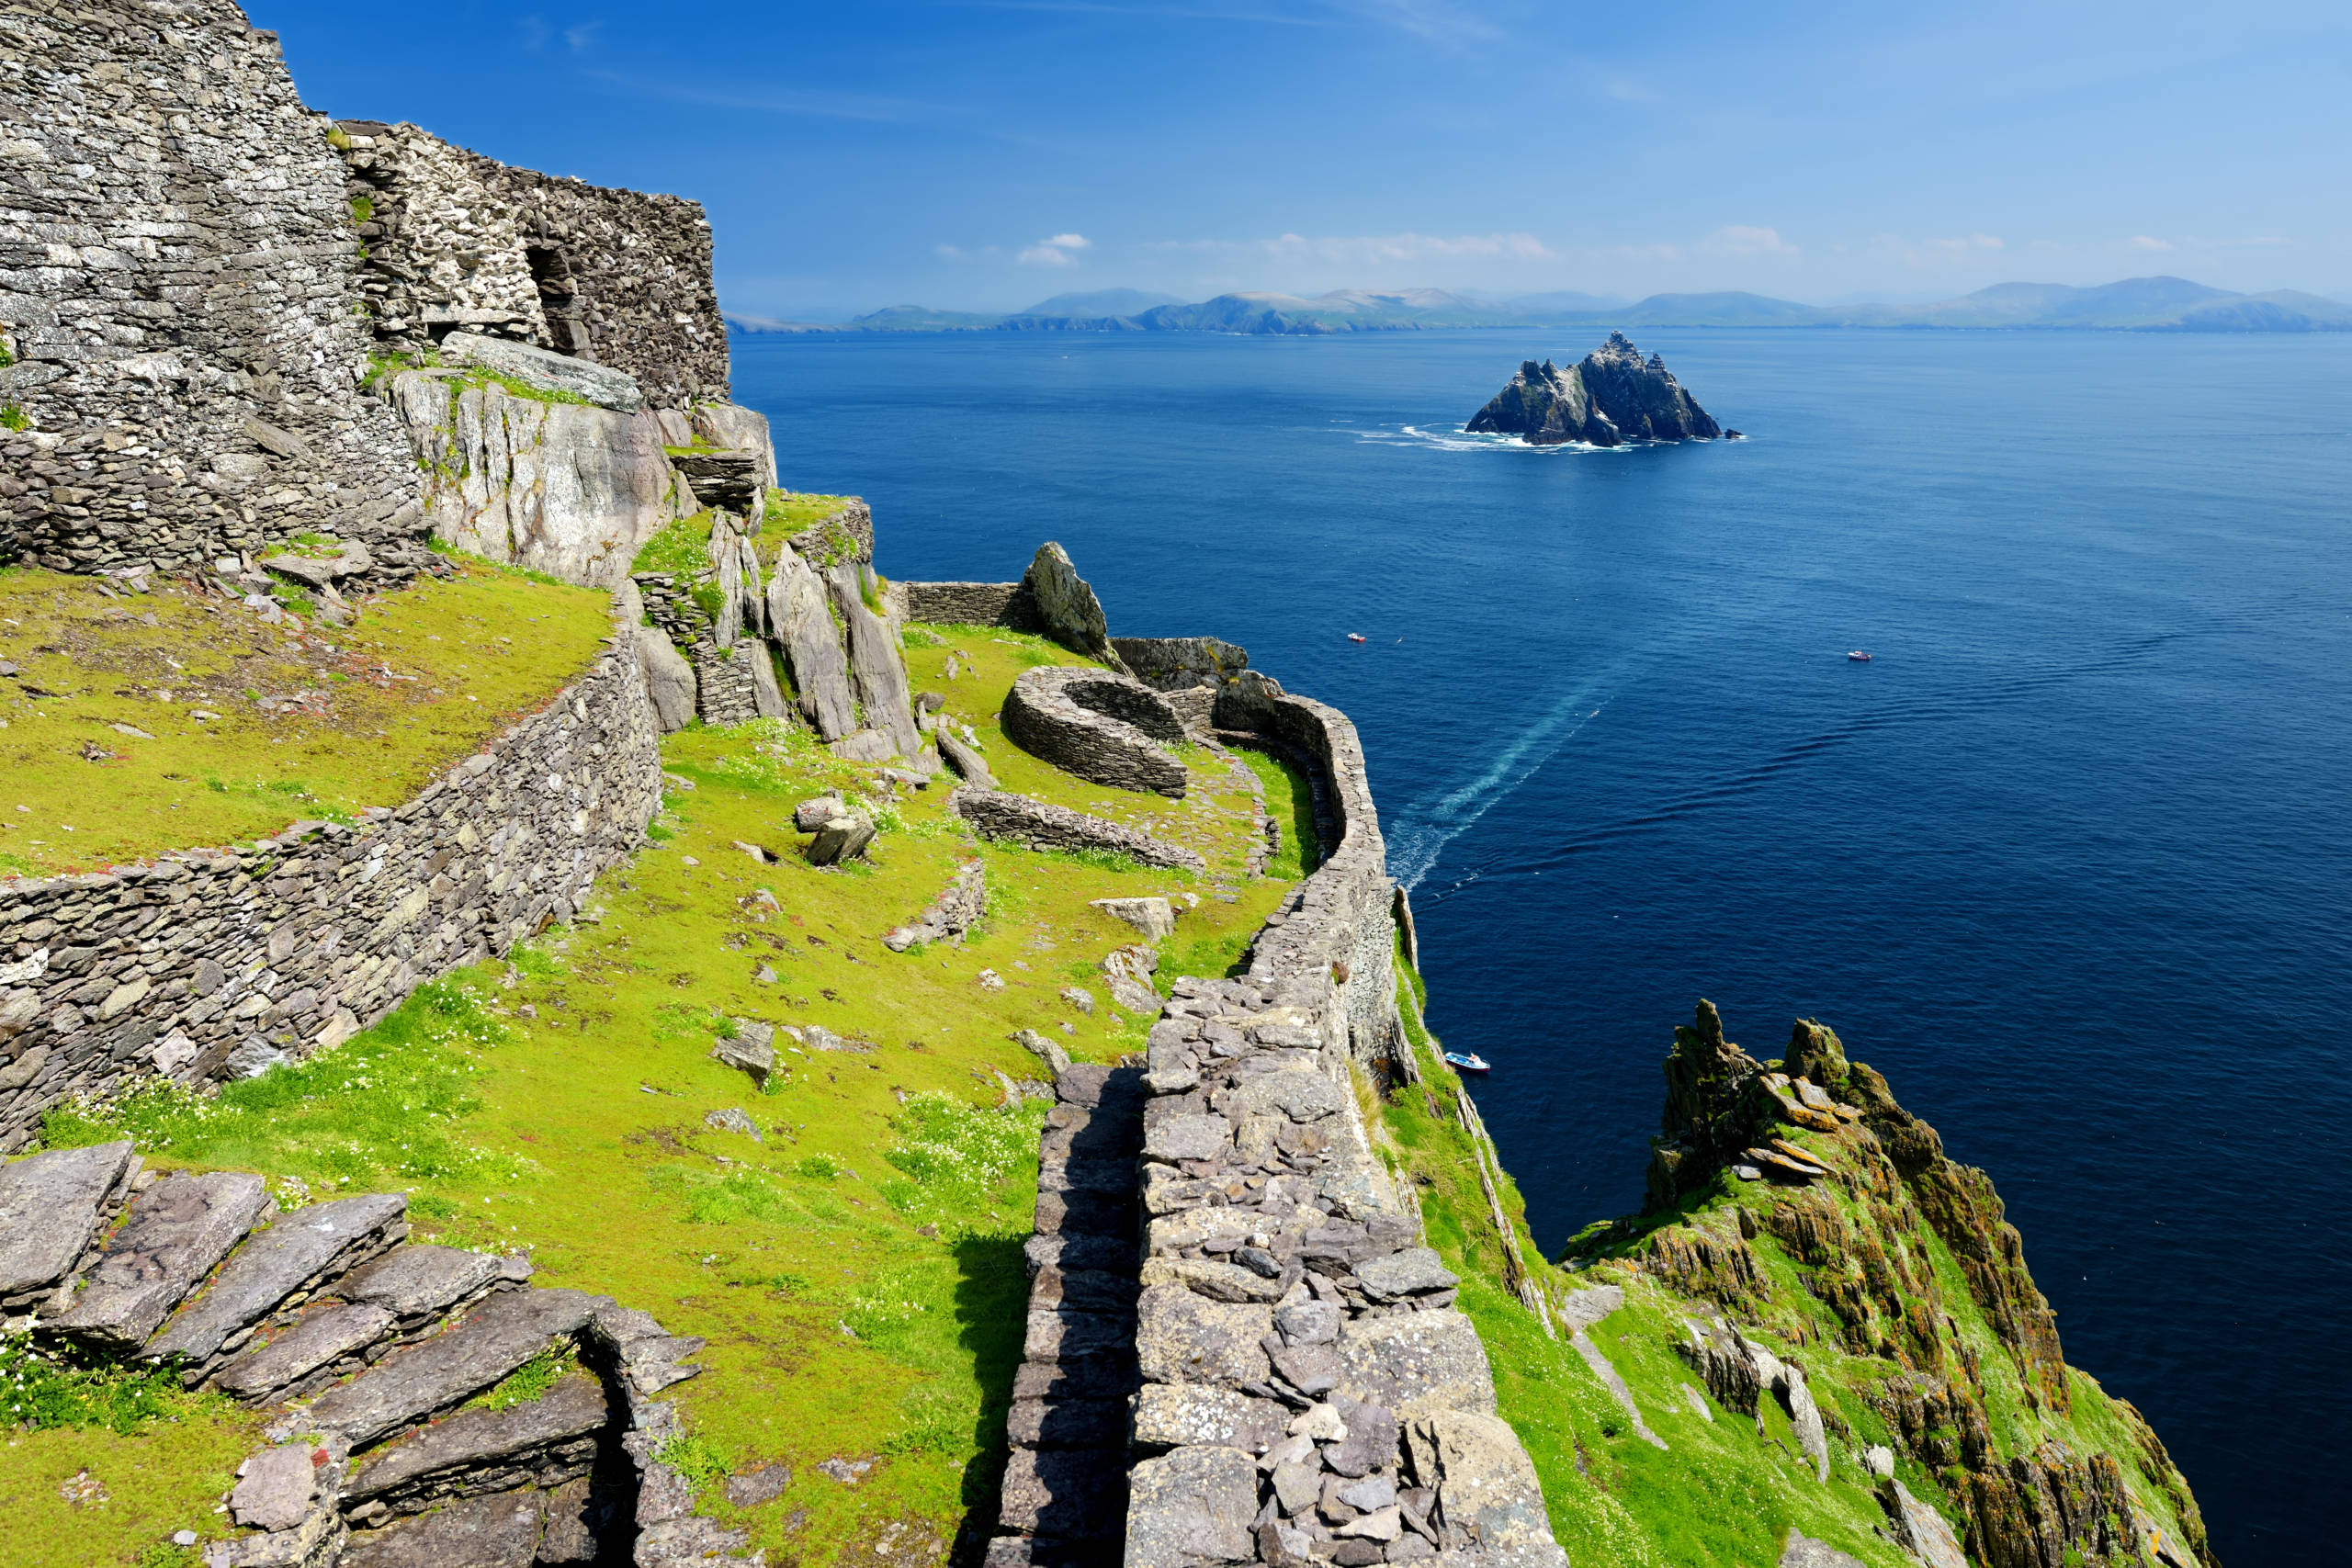 Skellig Michael or Great Skellig, home to the ruined remains of a Christian monastery, Country Kerry, Ireland